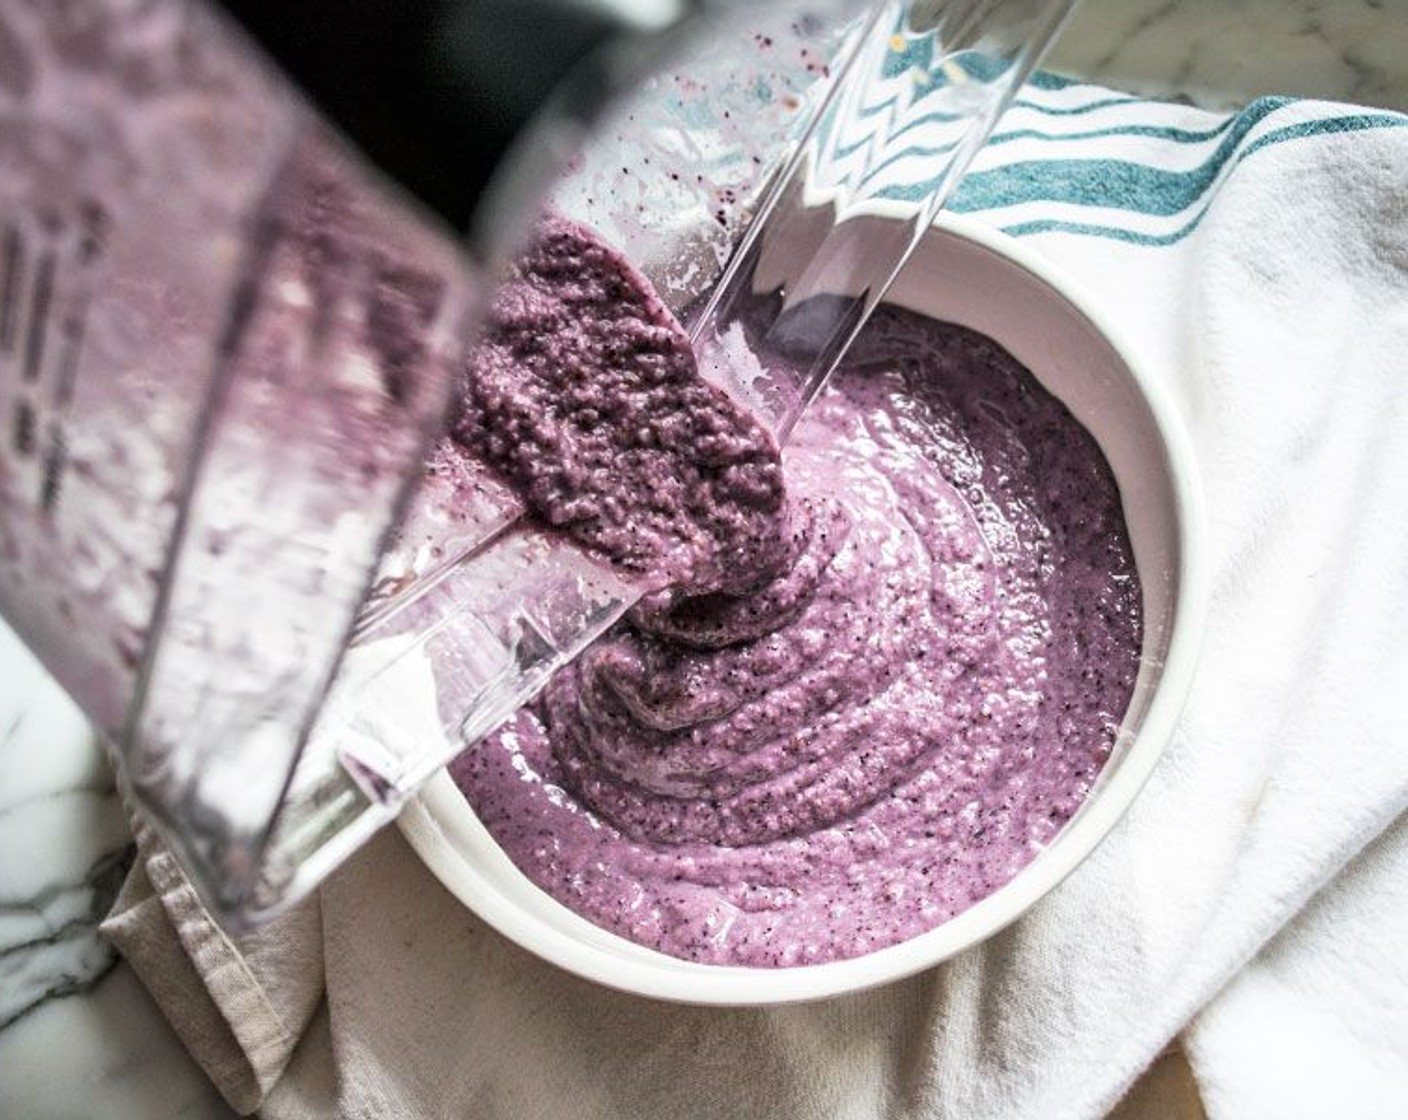 step 1 Add Banana (1), Frozen Blueberries (1/2 cup), Unsweetened Vanilla Almond Milk (1/2 cup), Pitted Dates (1/4 cup), Creamy Peanut Butter (1 Tbsp), and Ice (to taste) to a high power blender. Blend until smooth.